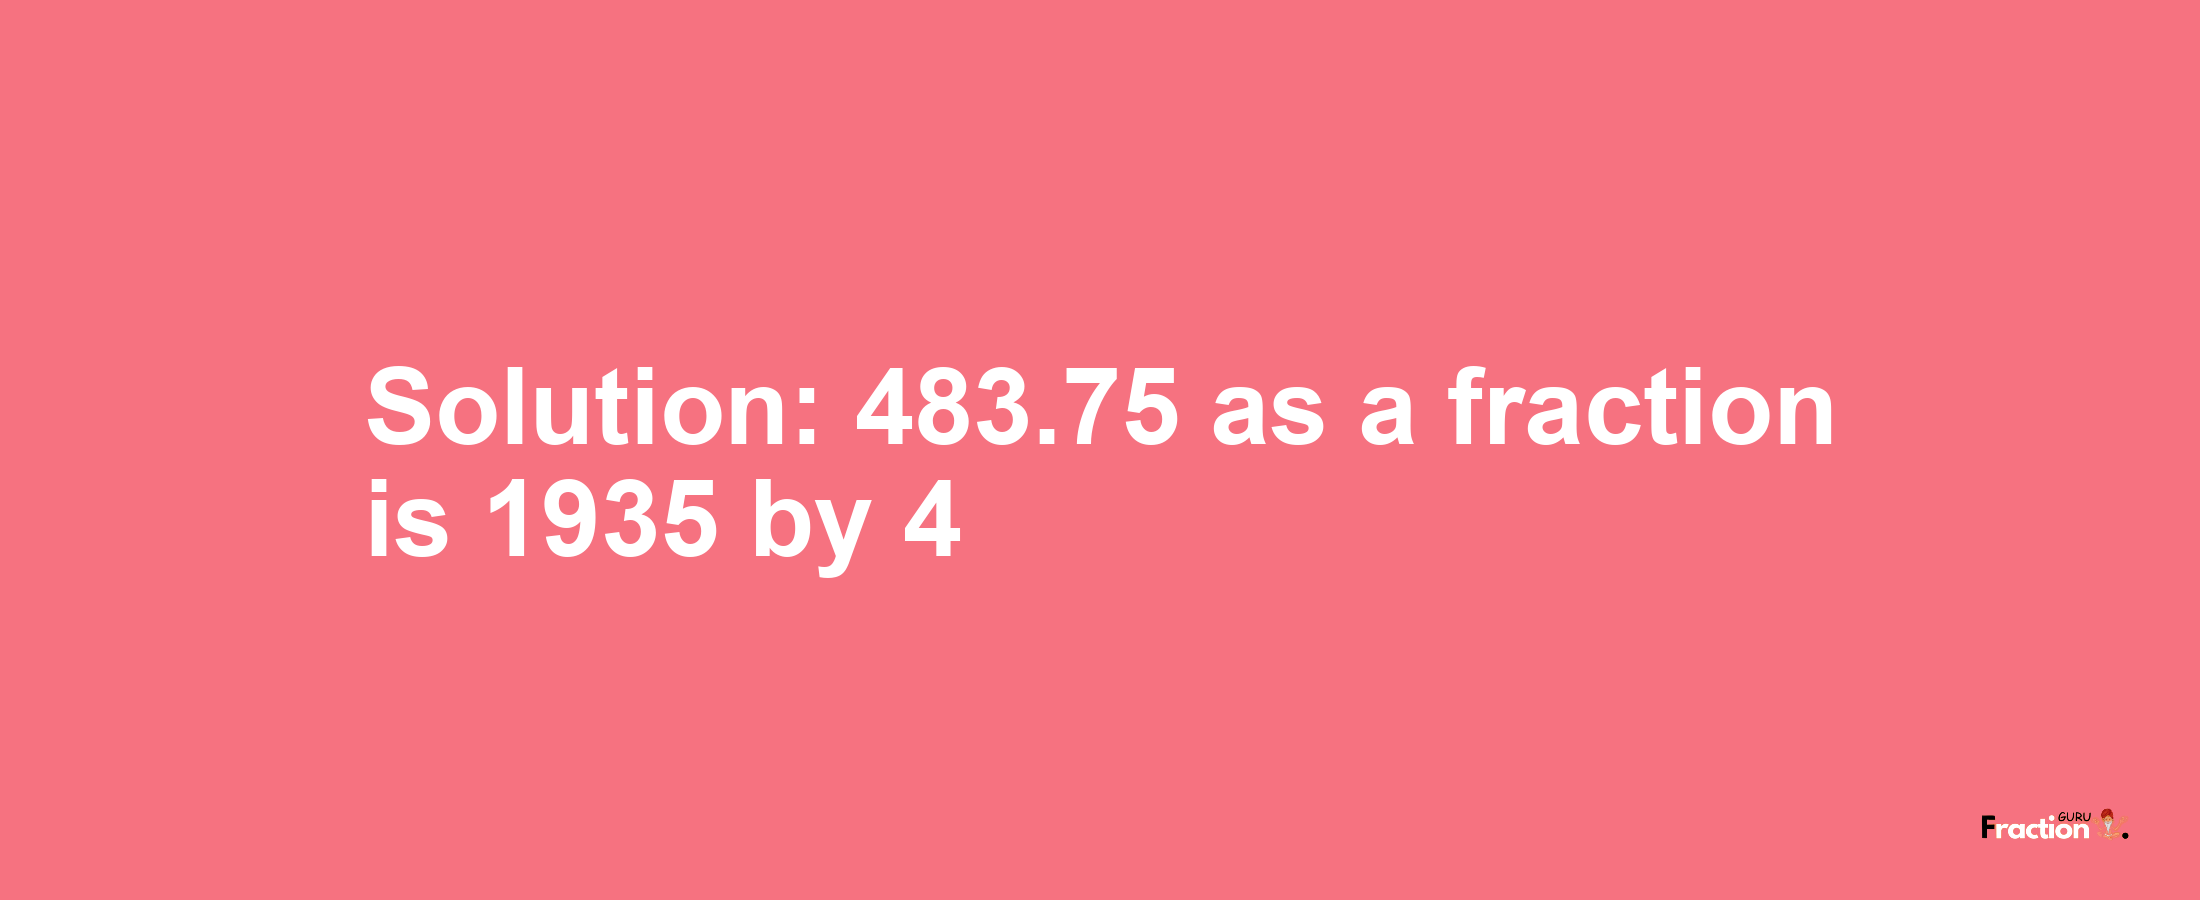 Solution:483.75 as a fraction is 1935/4